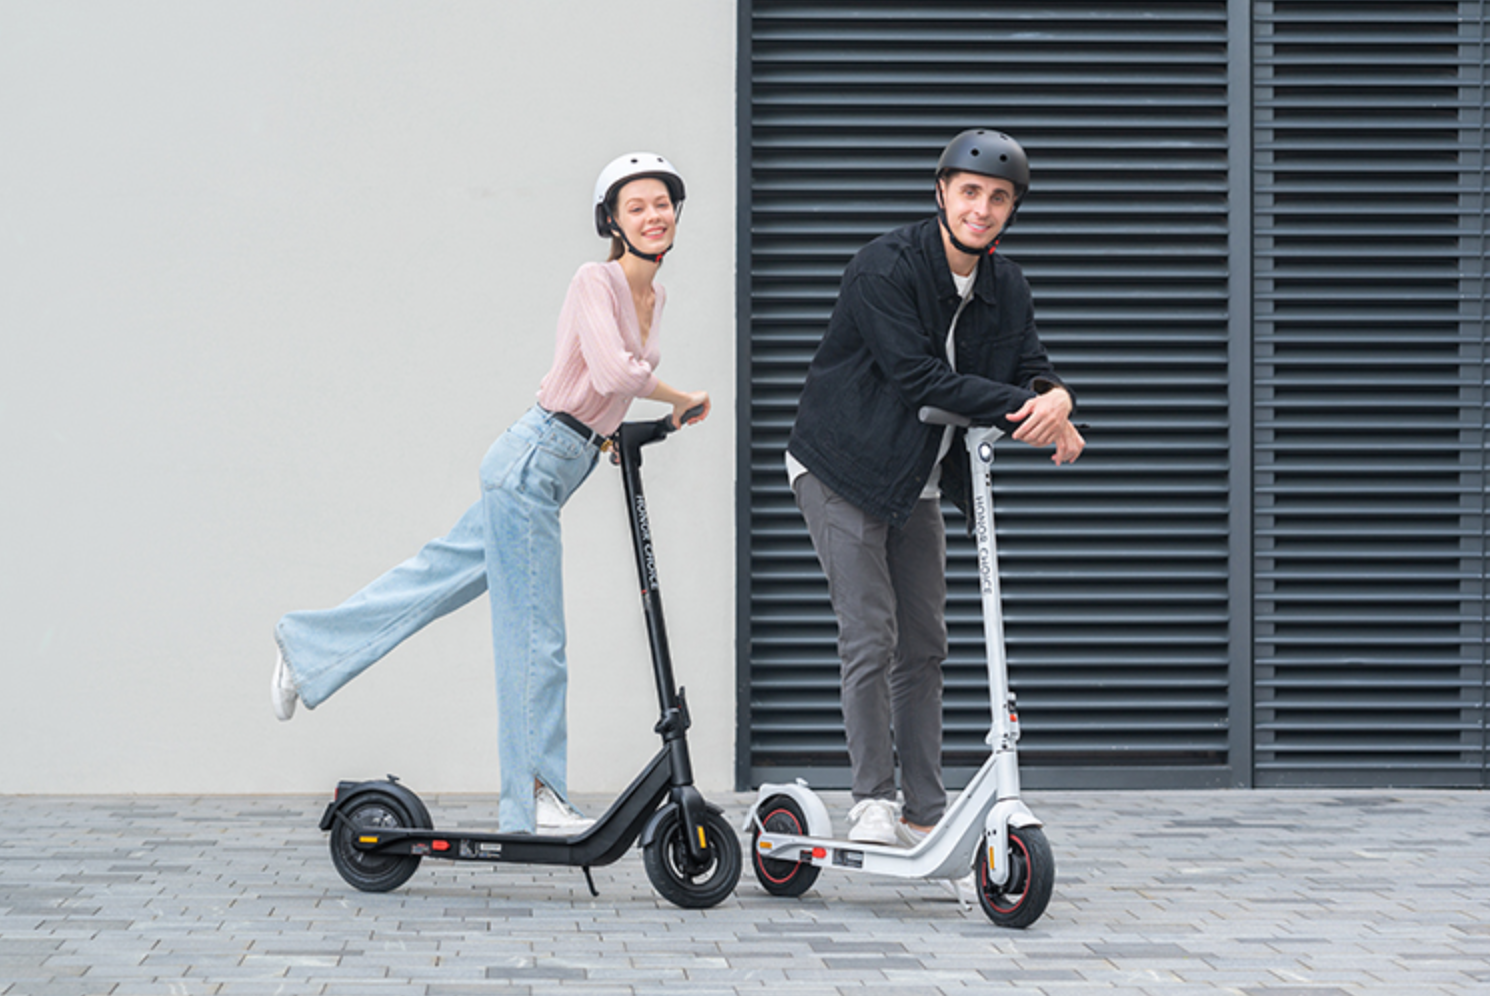 Xiaomi launches the MIJIA Electric Scooter 3 Lite priced at 1,899 yuan  (~$298) - Gizmochina